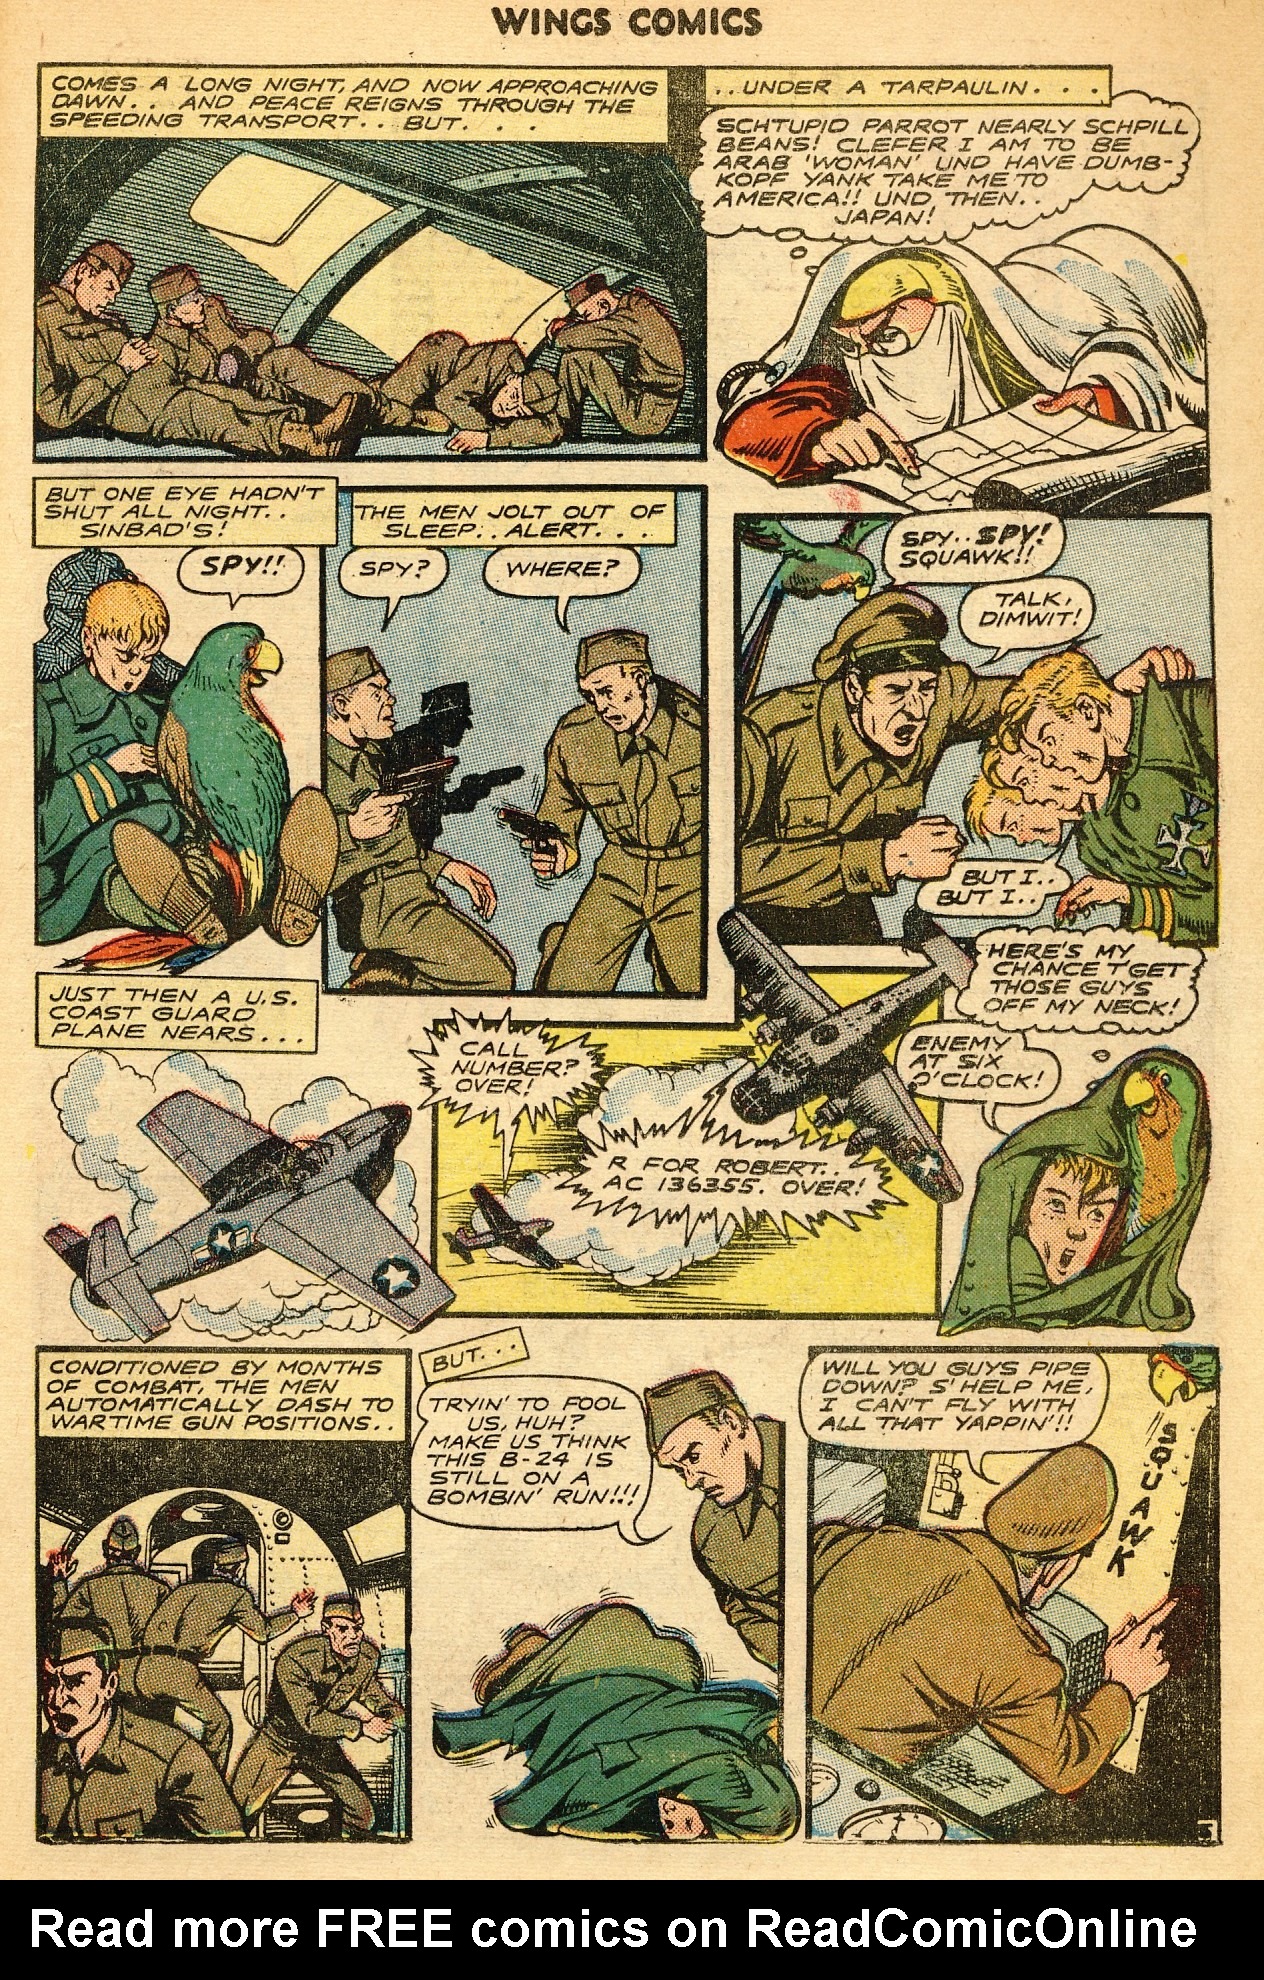 Read online Wings Comics comic -  Issue #63 - 23